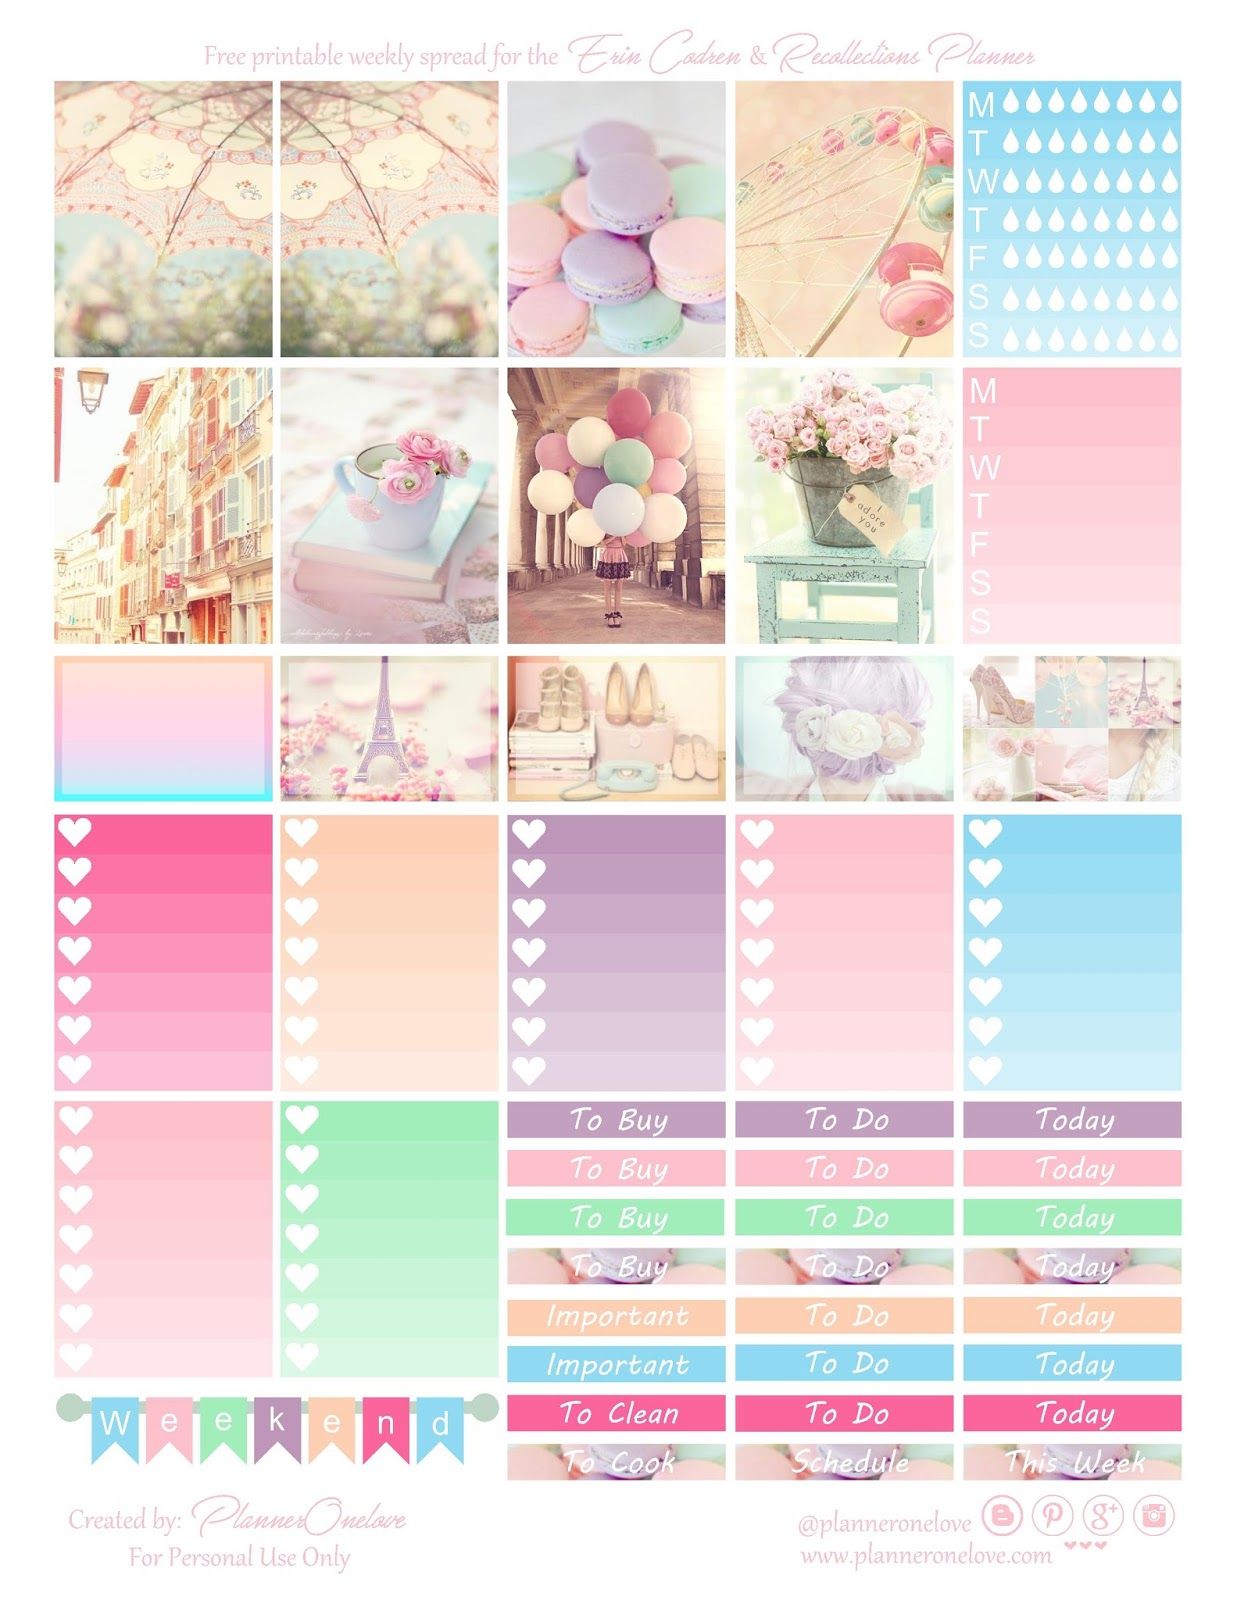 gue deco planner free